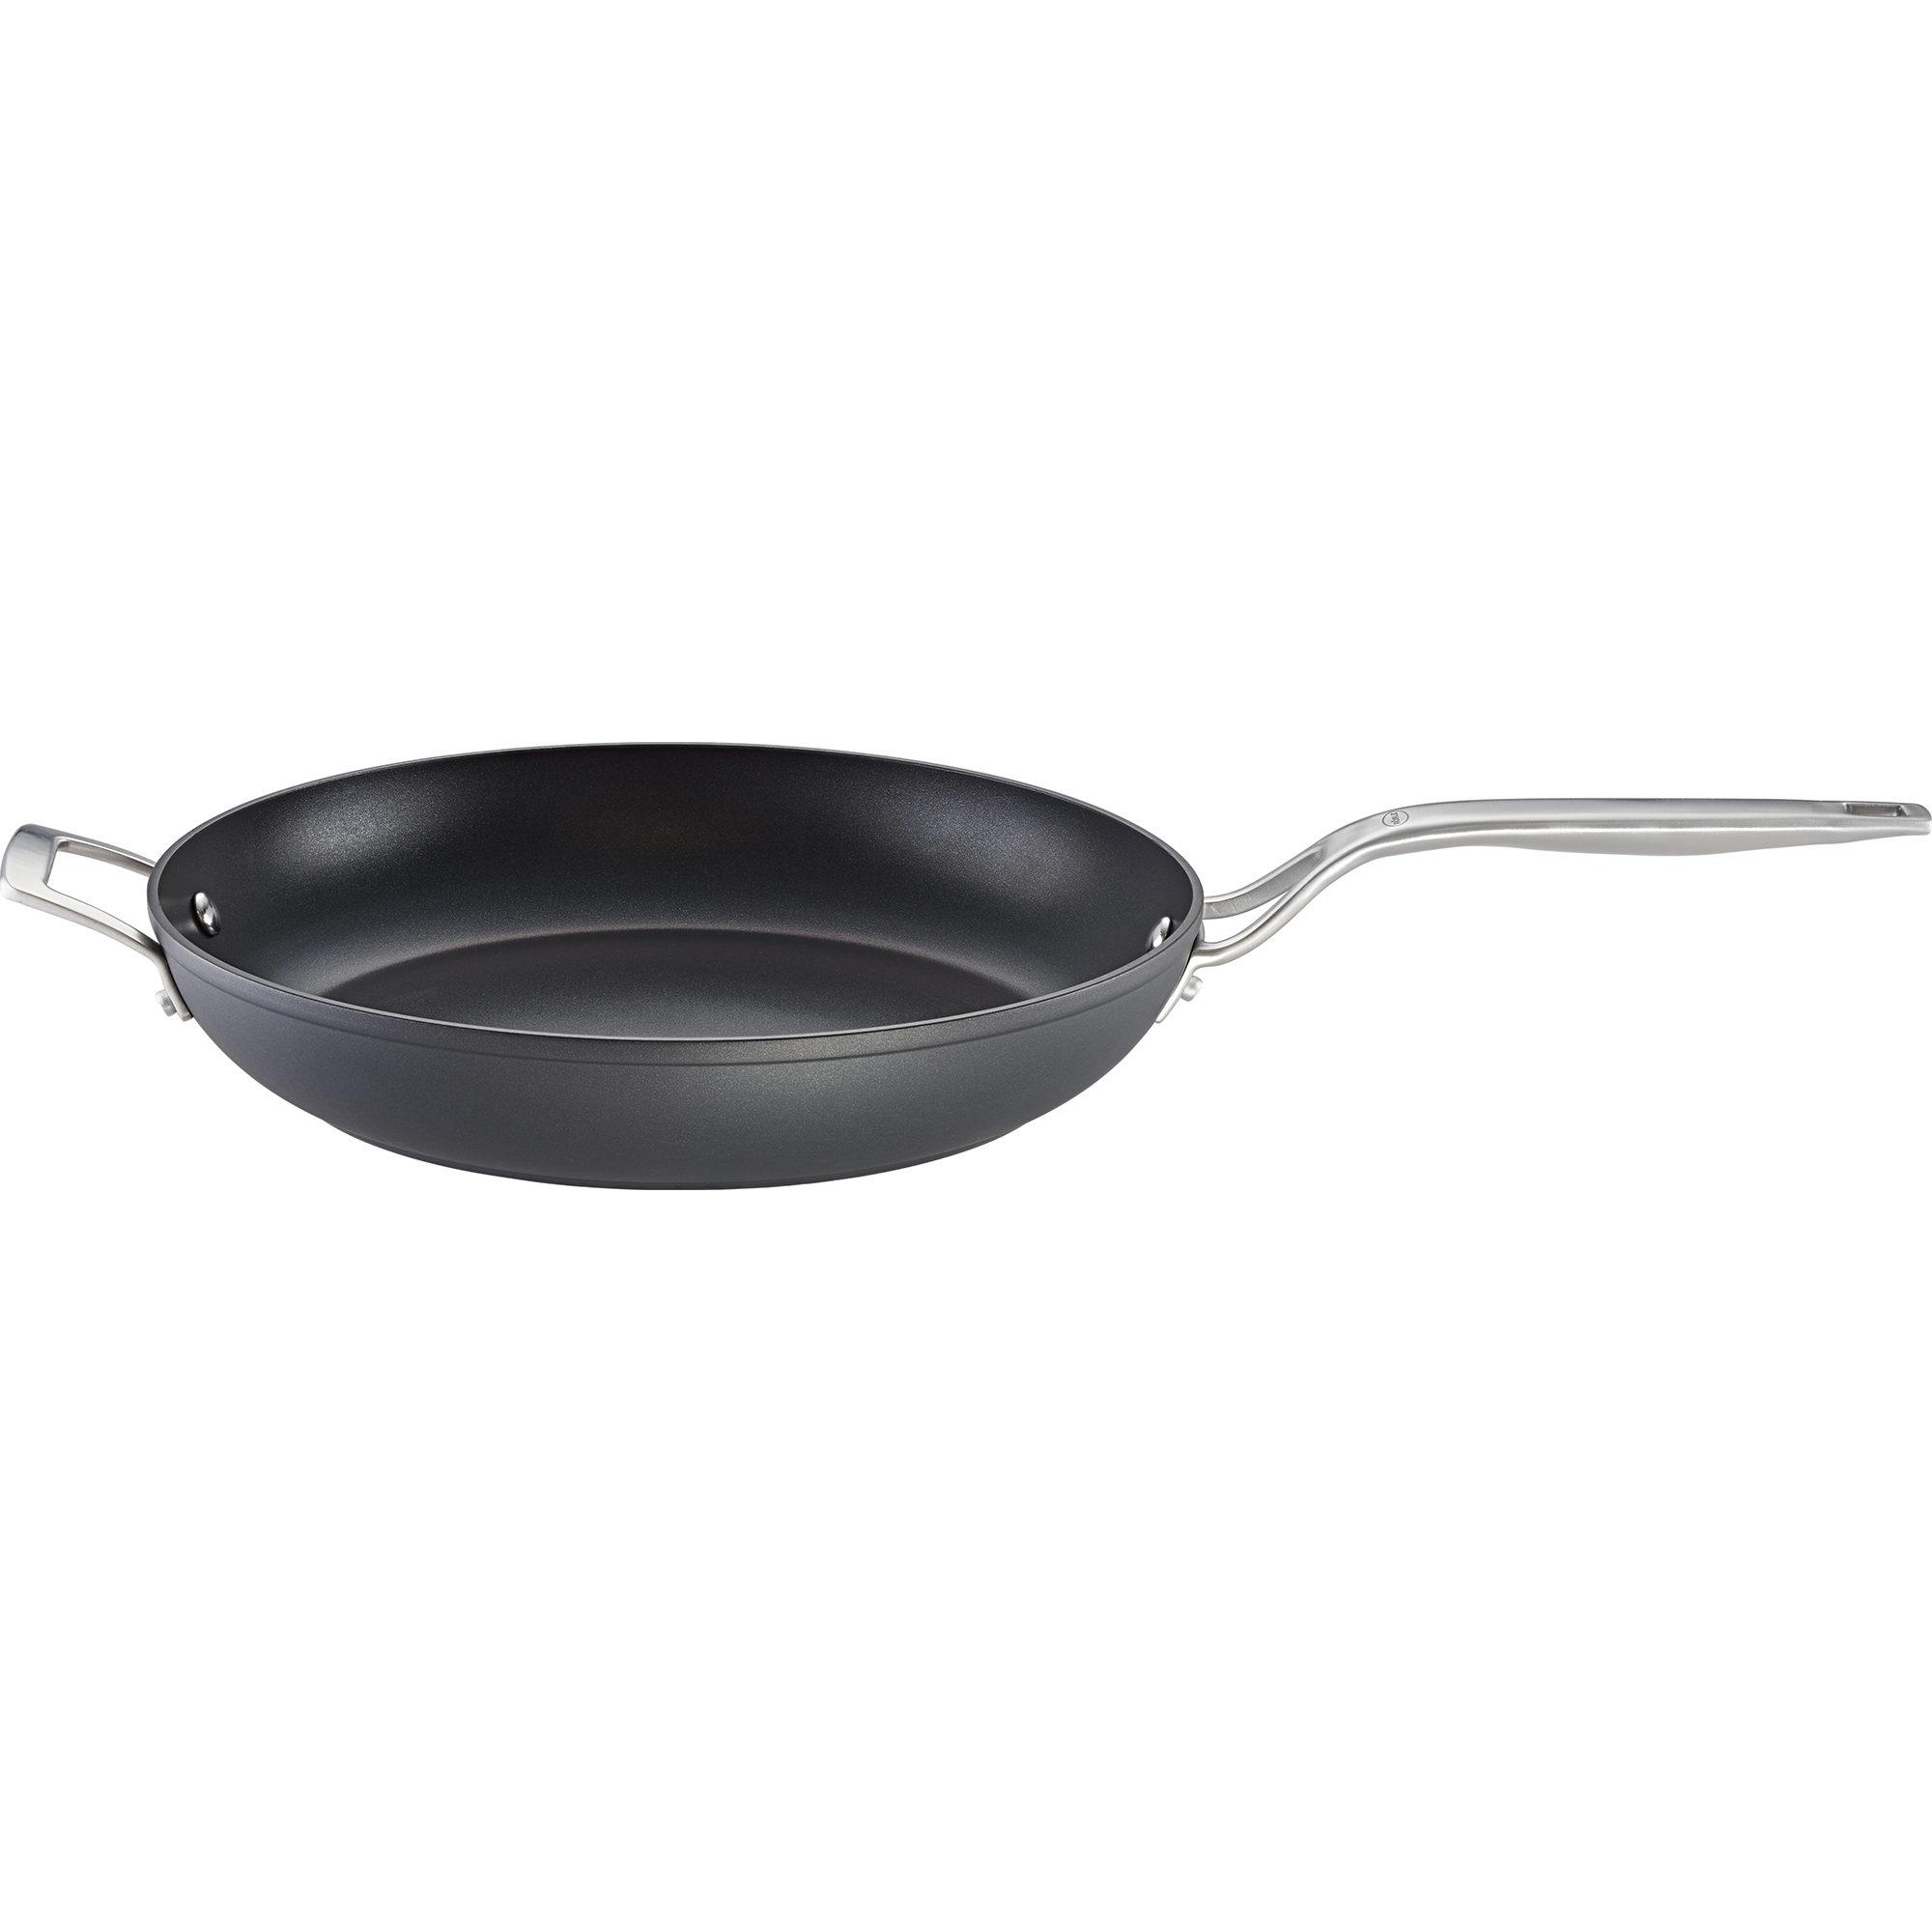 Frying Pan "Raise" Ø 32 cm | 12.5 in. from forged aluminum with non-stick coating ProPlex®